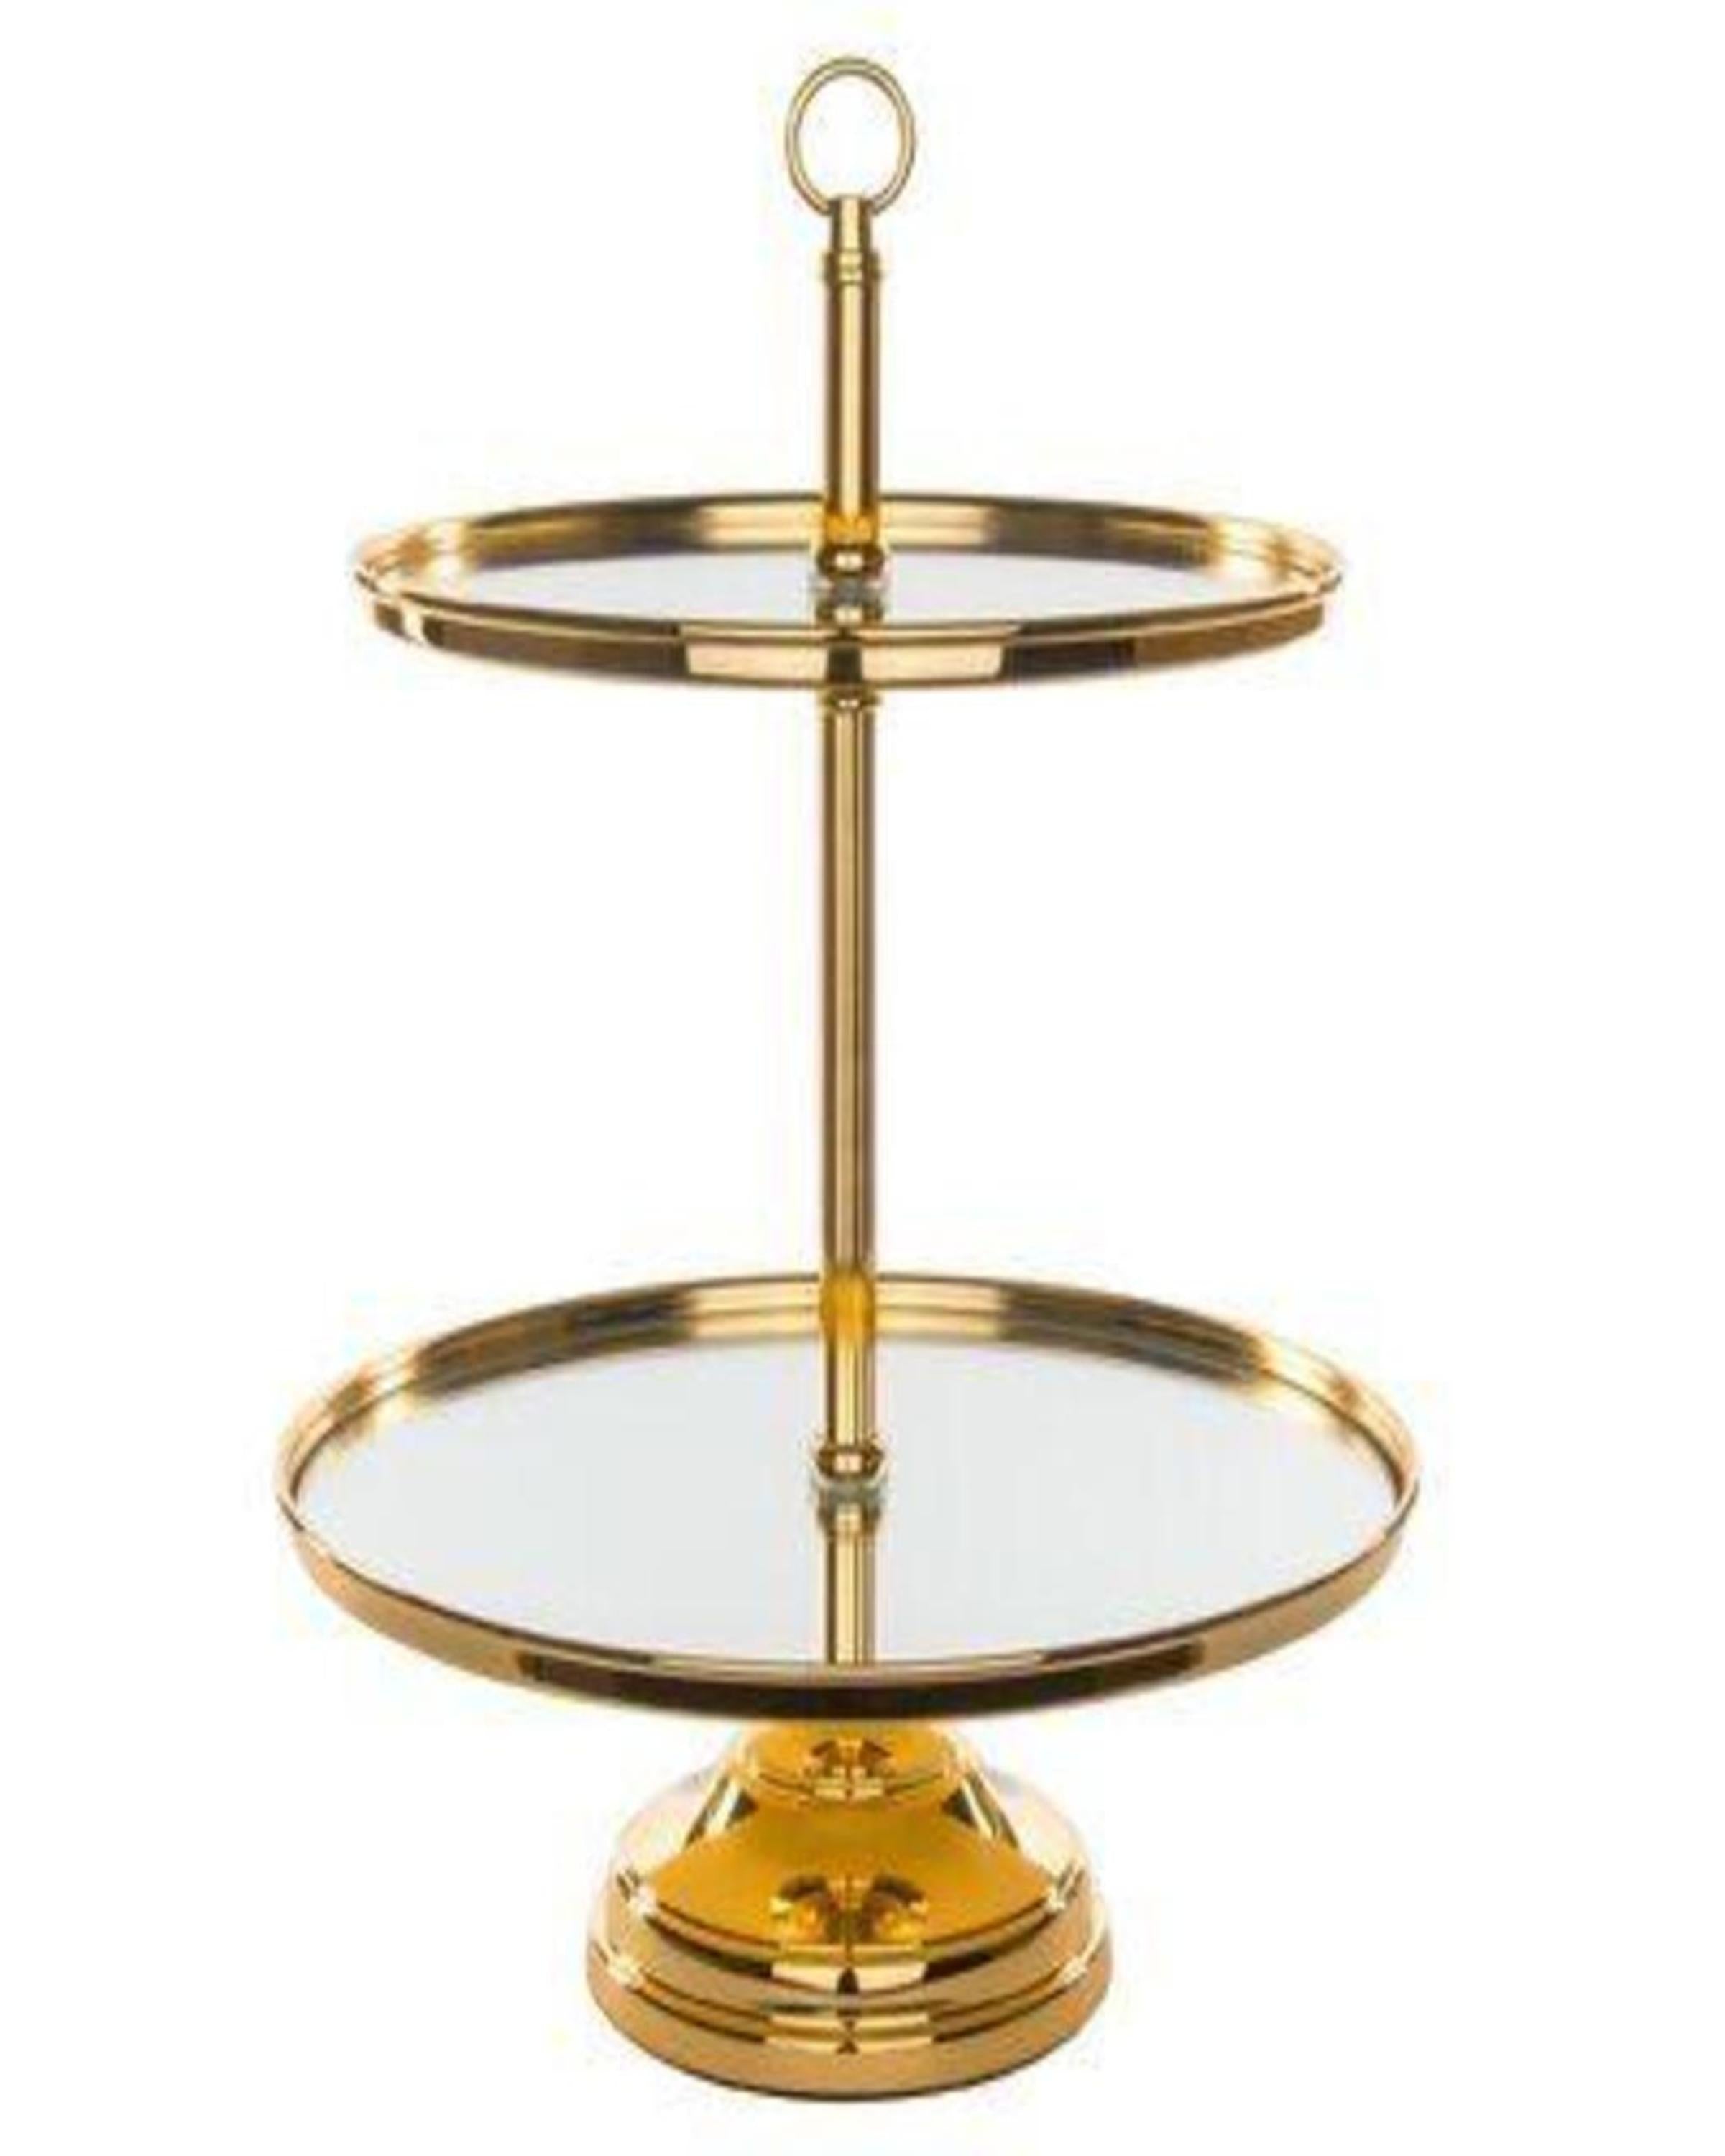 Golden Two-Tier Rose Cake Stand